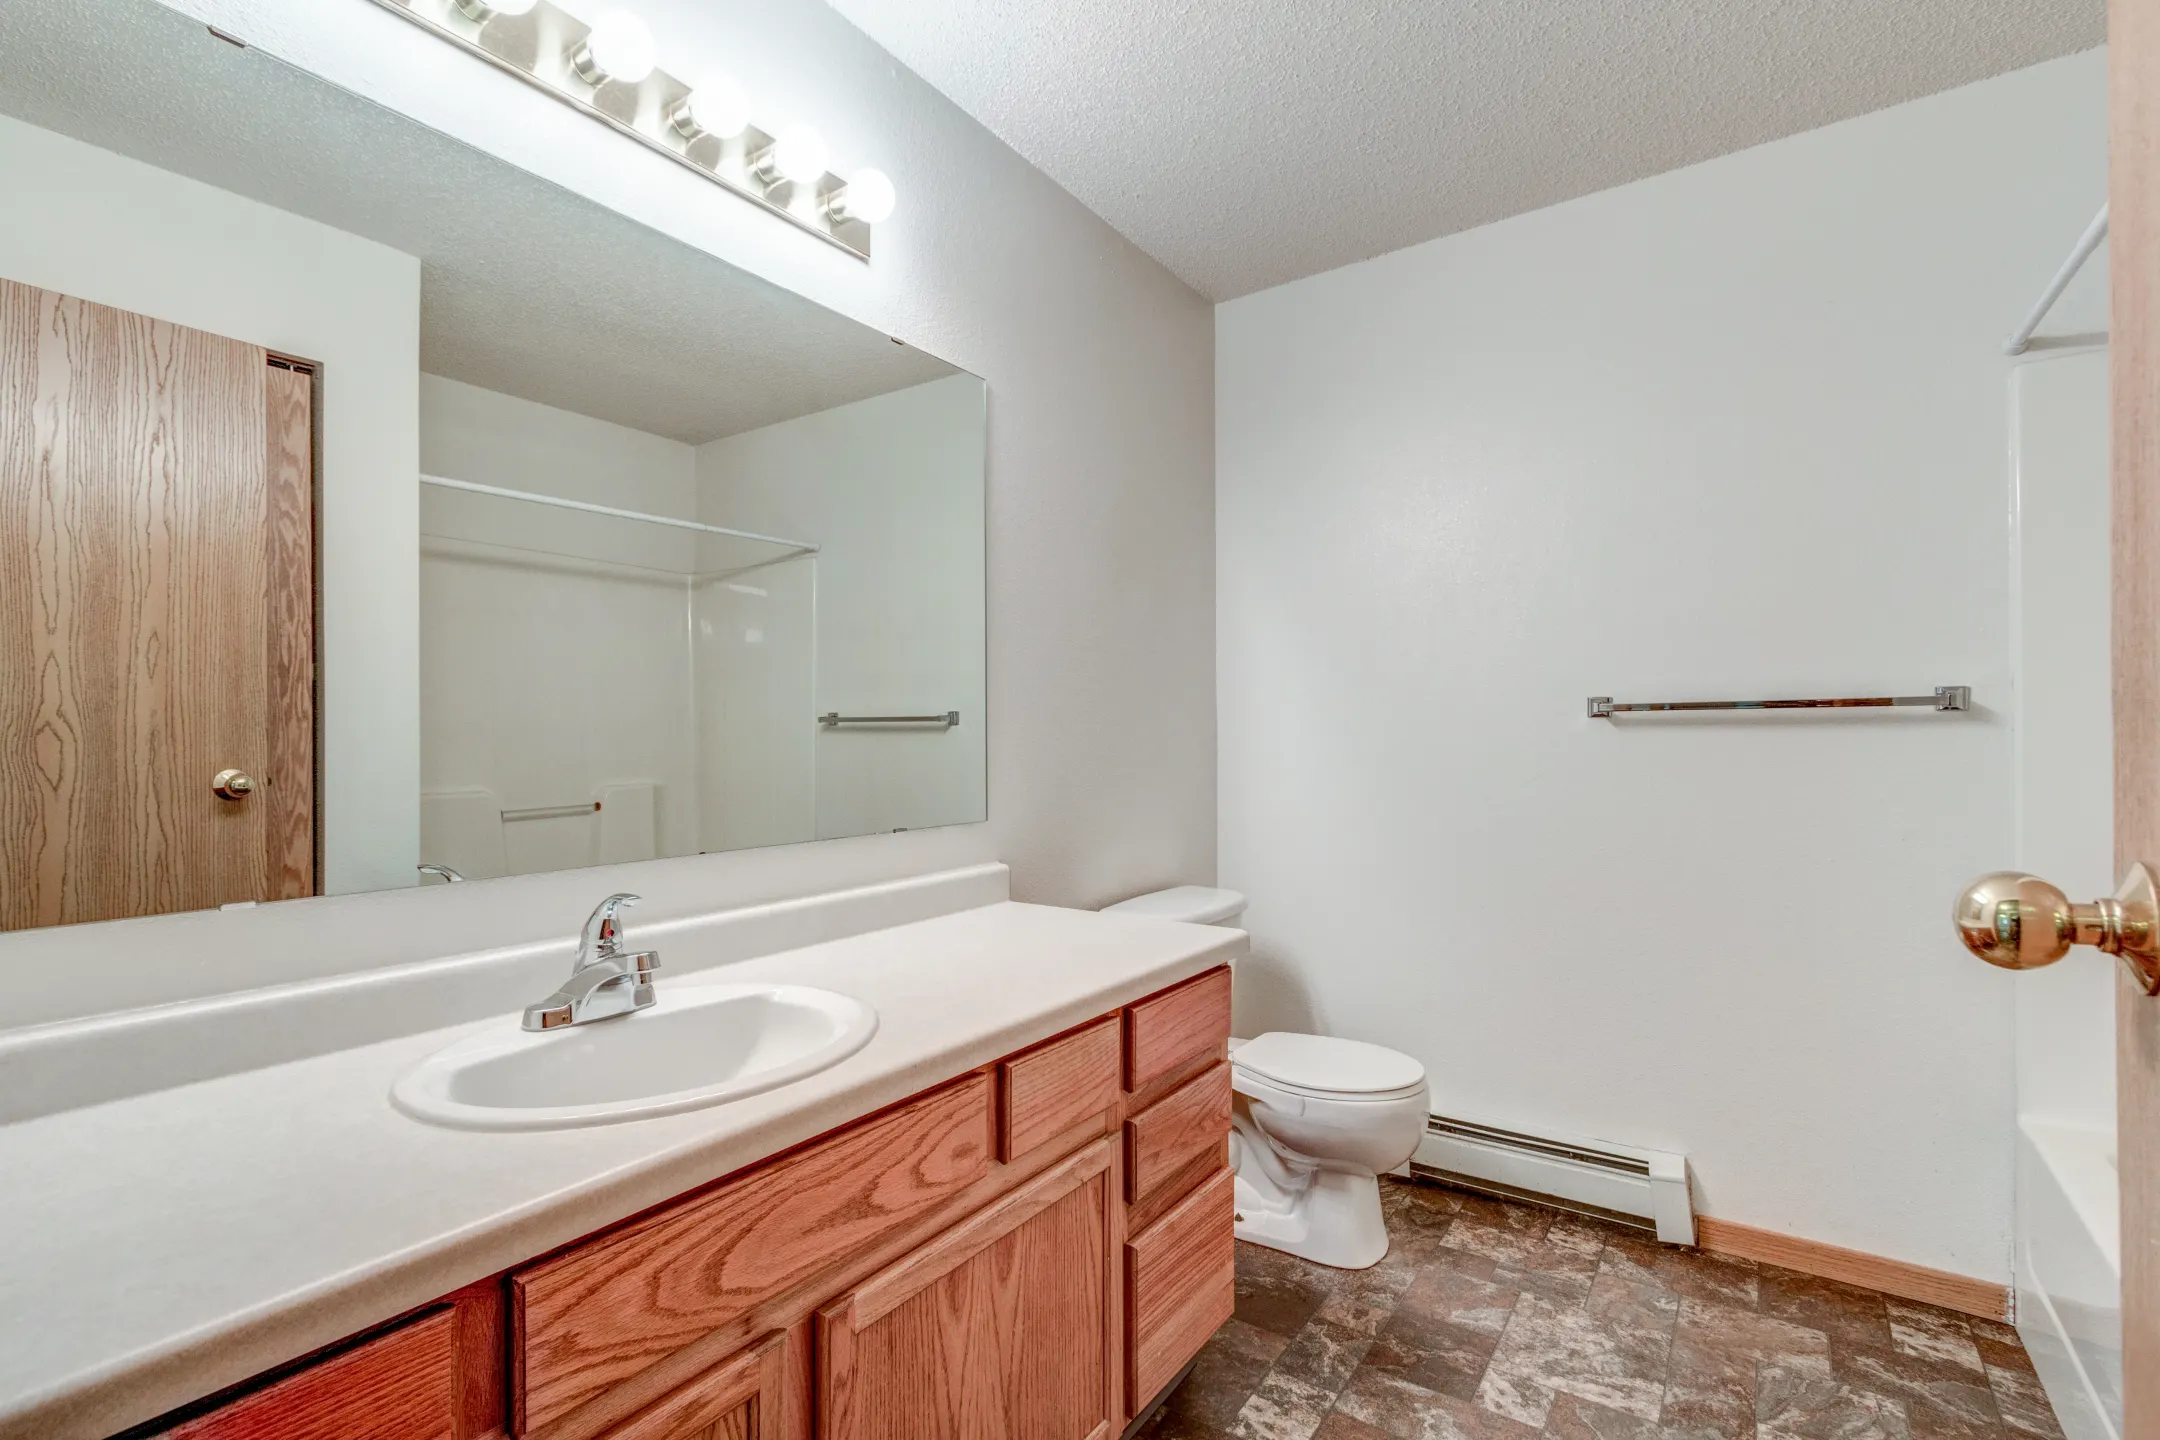 Bathroom - Wheatland Place Apartments & Townhomes - Fargo, ND